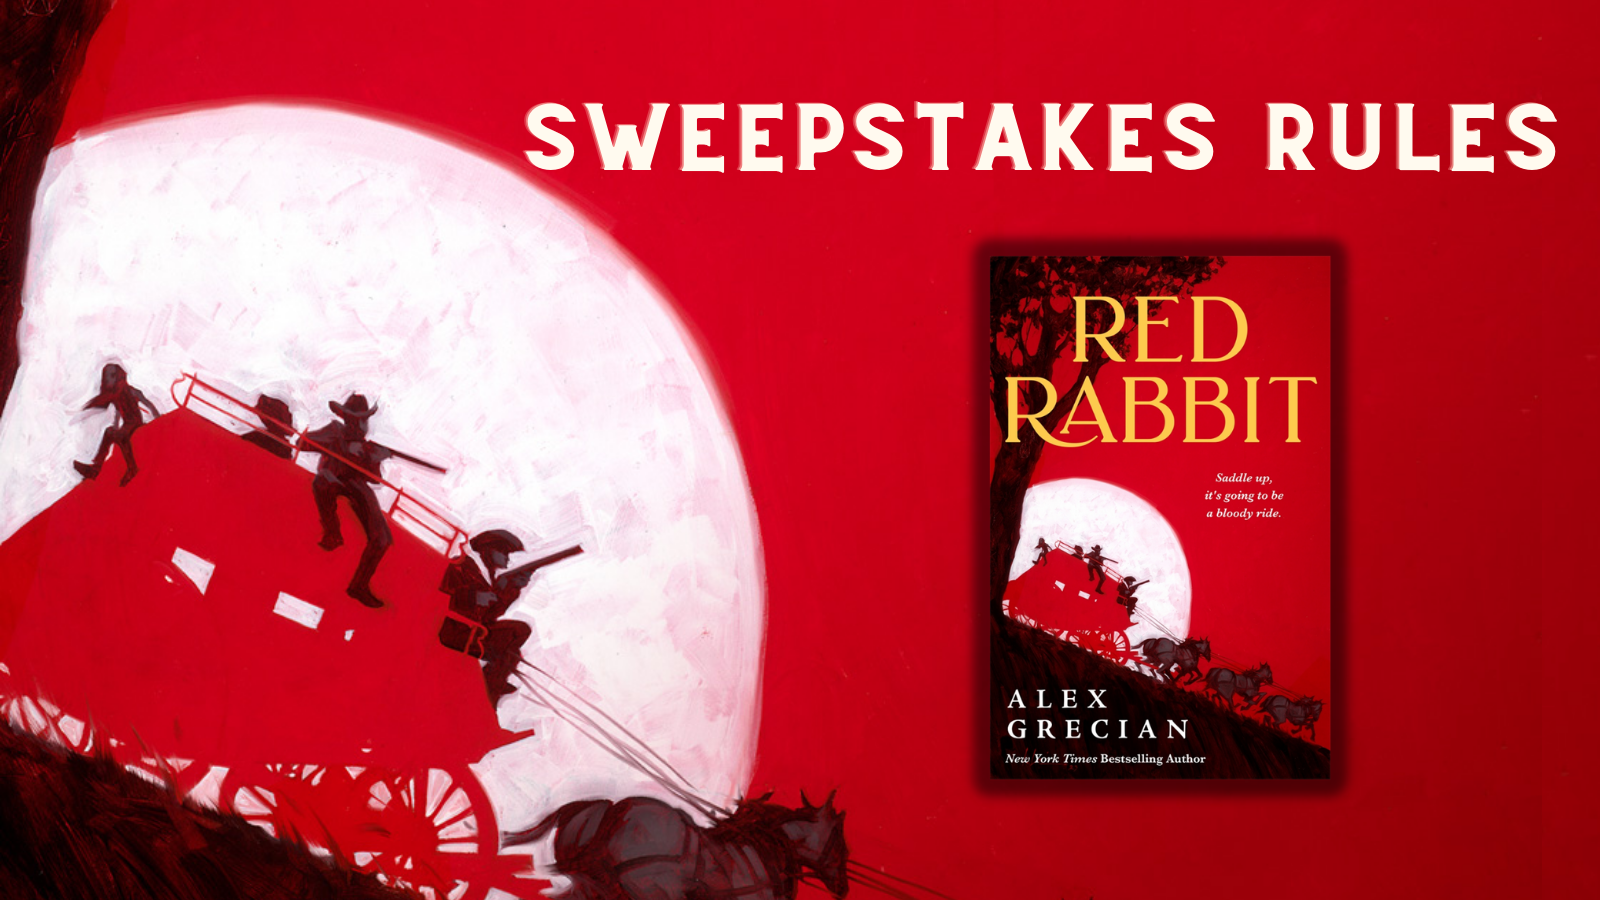 Red Rabbit Sweepstakes Rules - 98